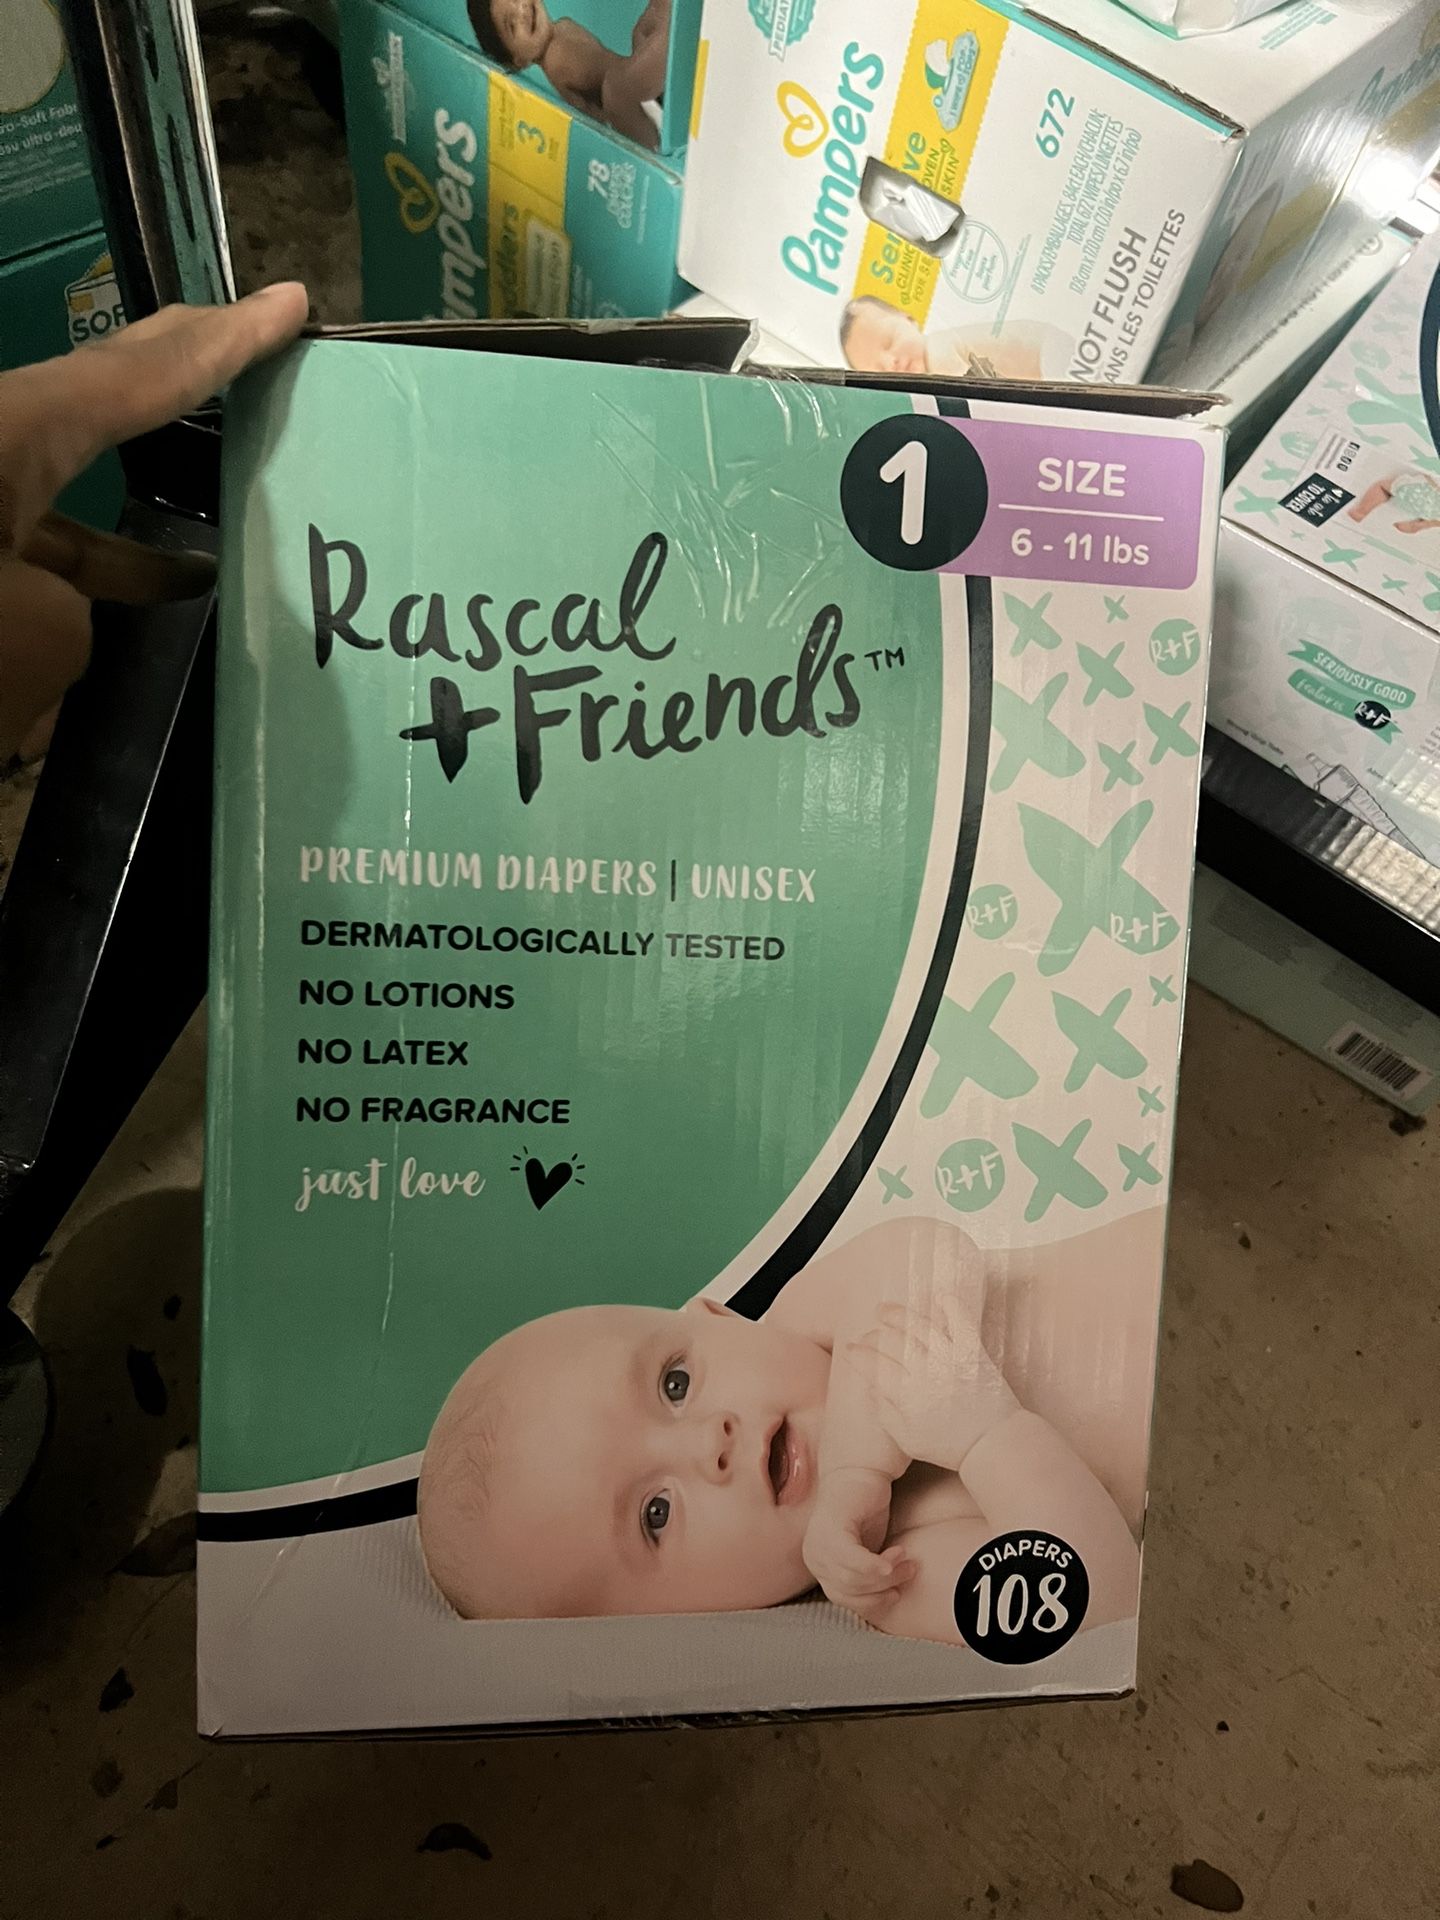 Rascal + Friends Size 1 -108ct Diapers